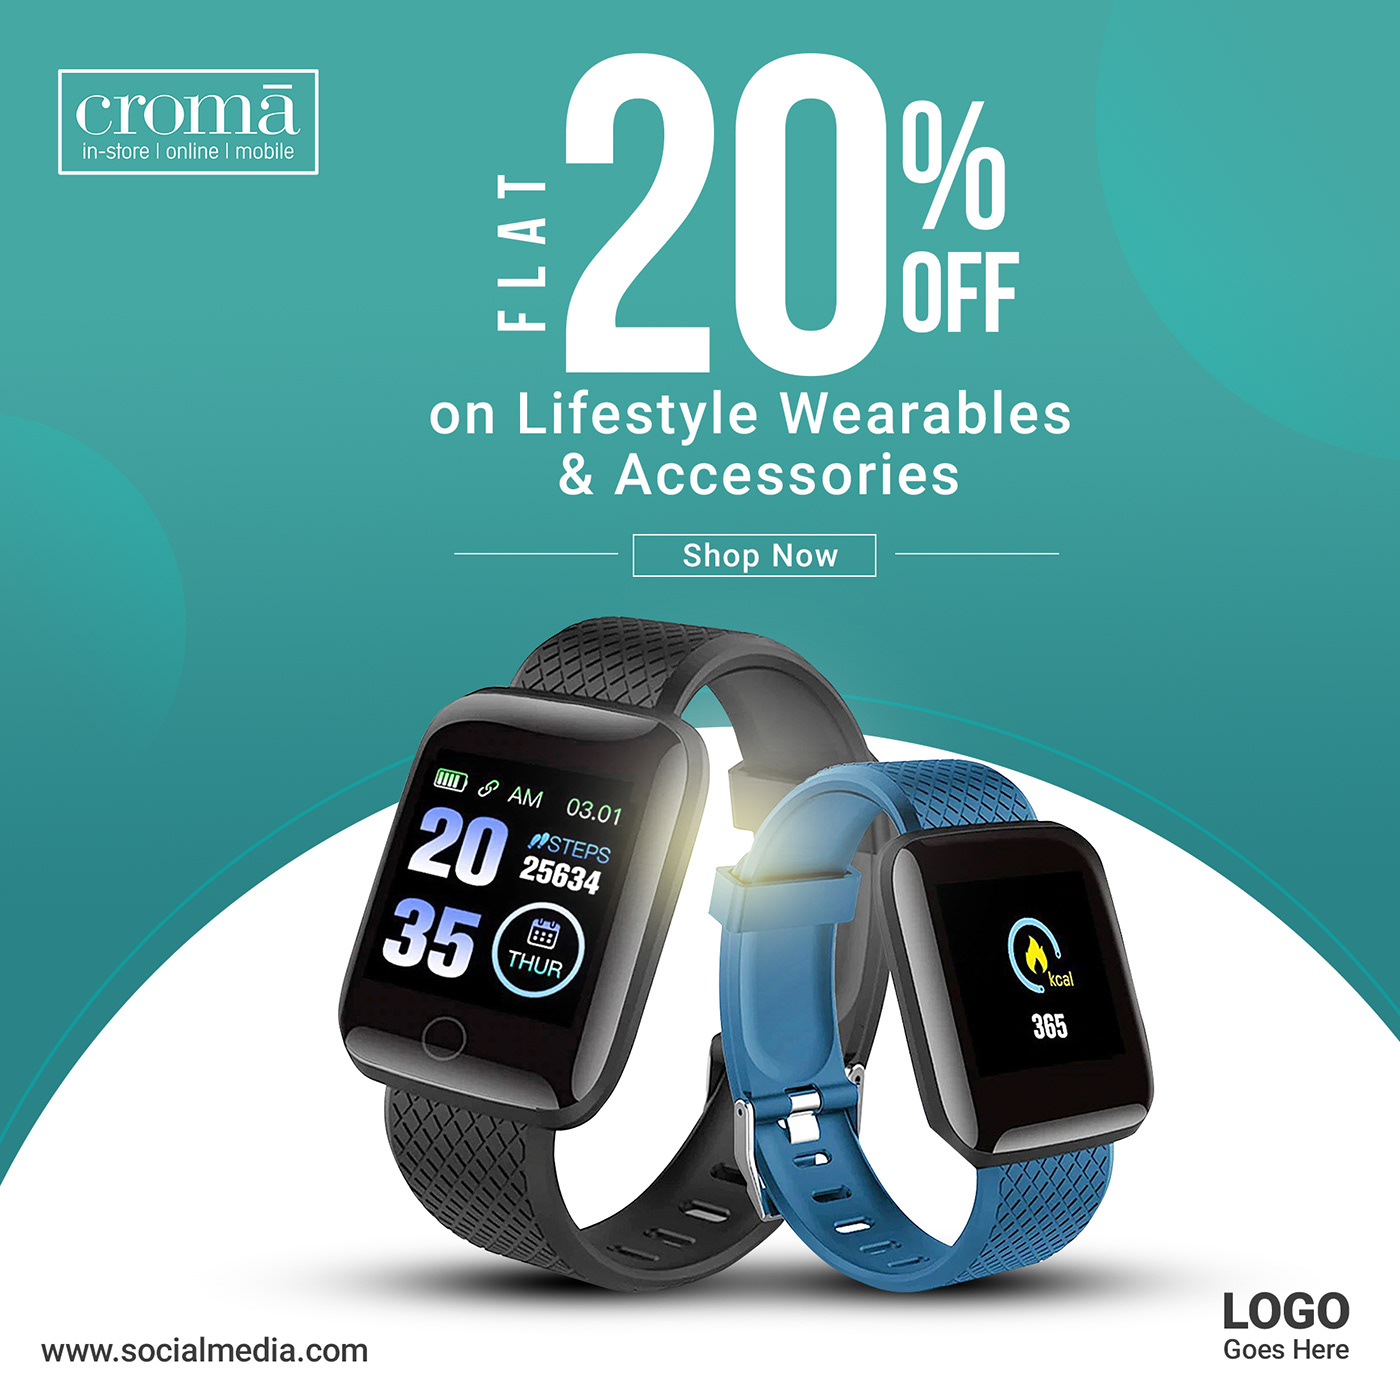 20% Off accessories creative croma discount offer offer unique design watch post Wearable